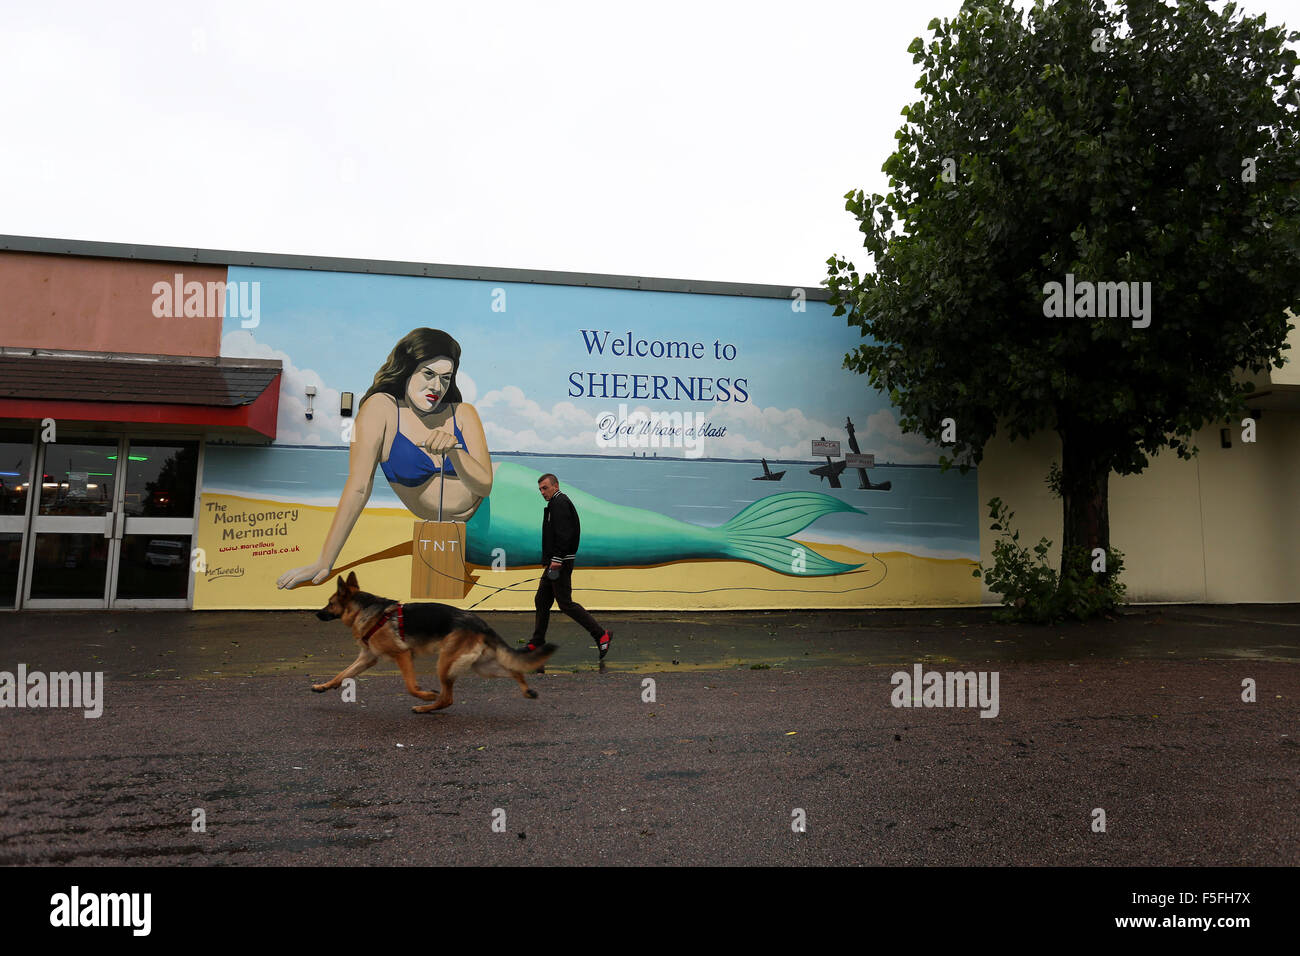 A painted wall in Sheerness, Kent, with a grumpy mermaid about to blow up the place with 'Welcome to Sheerness' in text above. Stock Photo